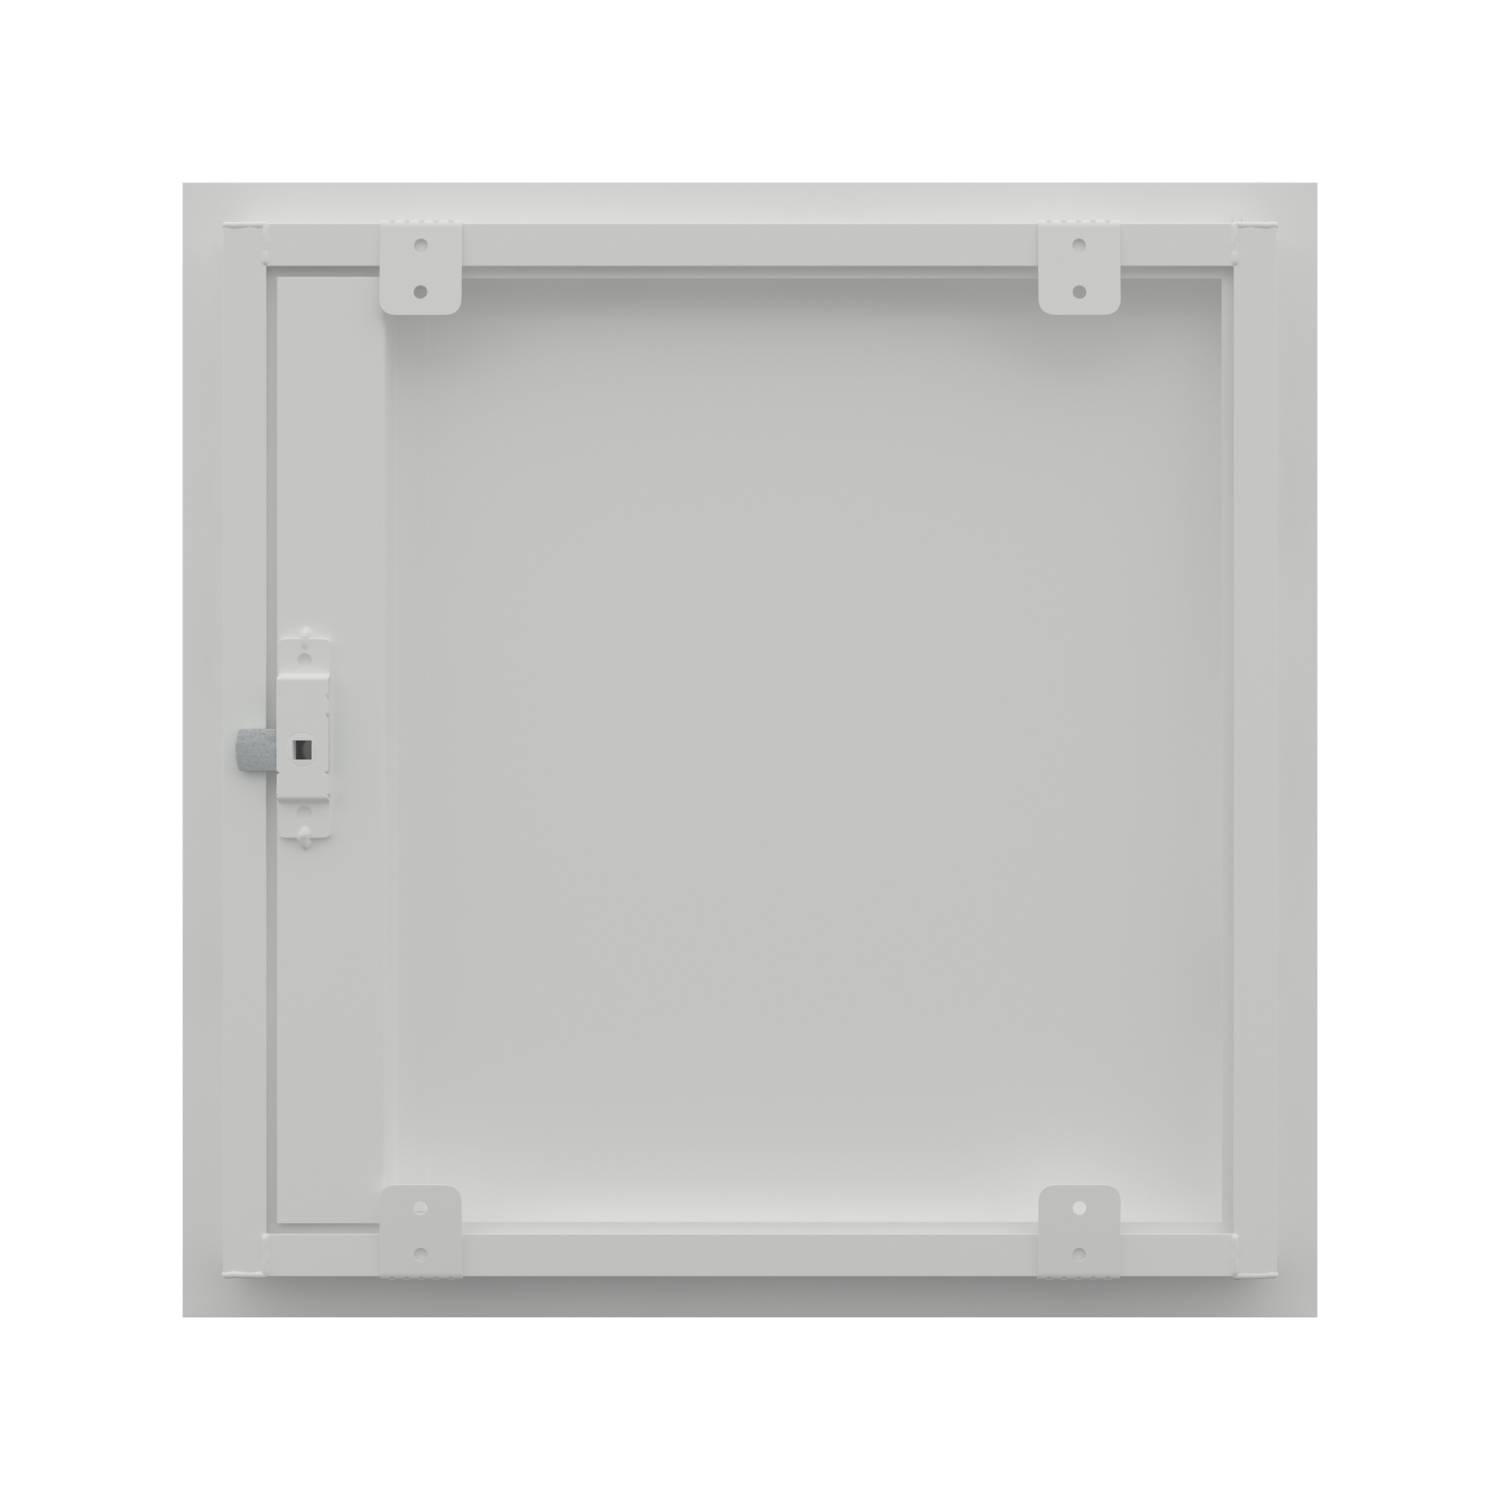 Slimfit Wall Metal Access Panel (EX01 Range) - Picture Frame - 2 Hour Fire Rated - Wall and Ceiling Access Panel